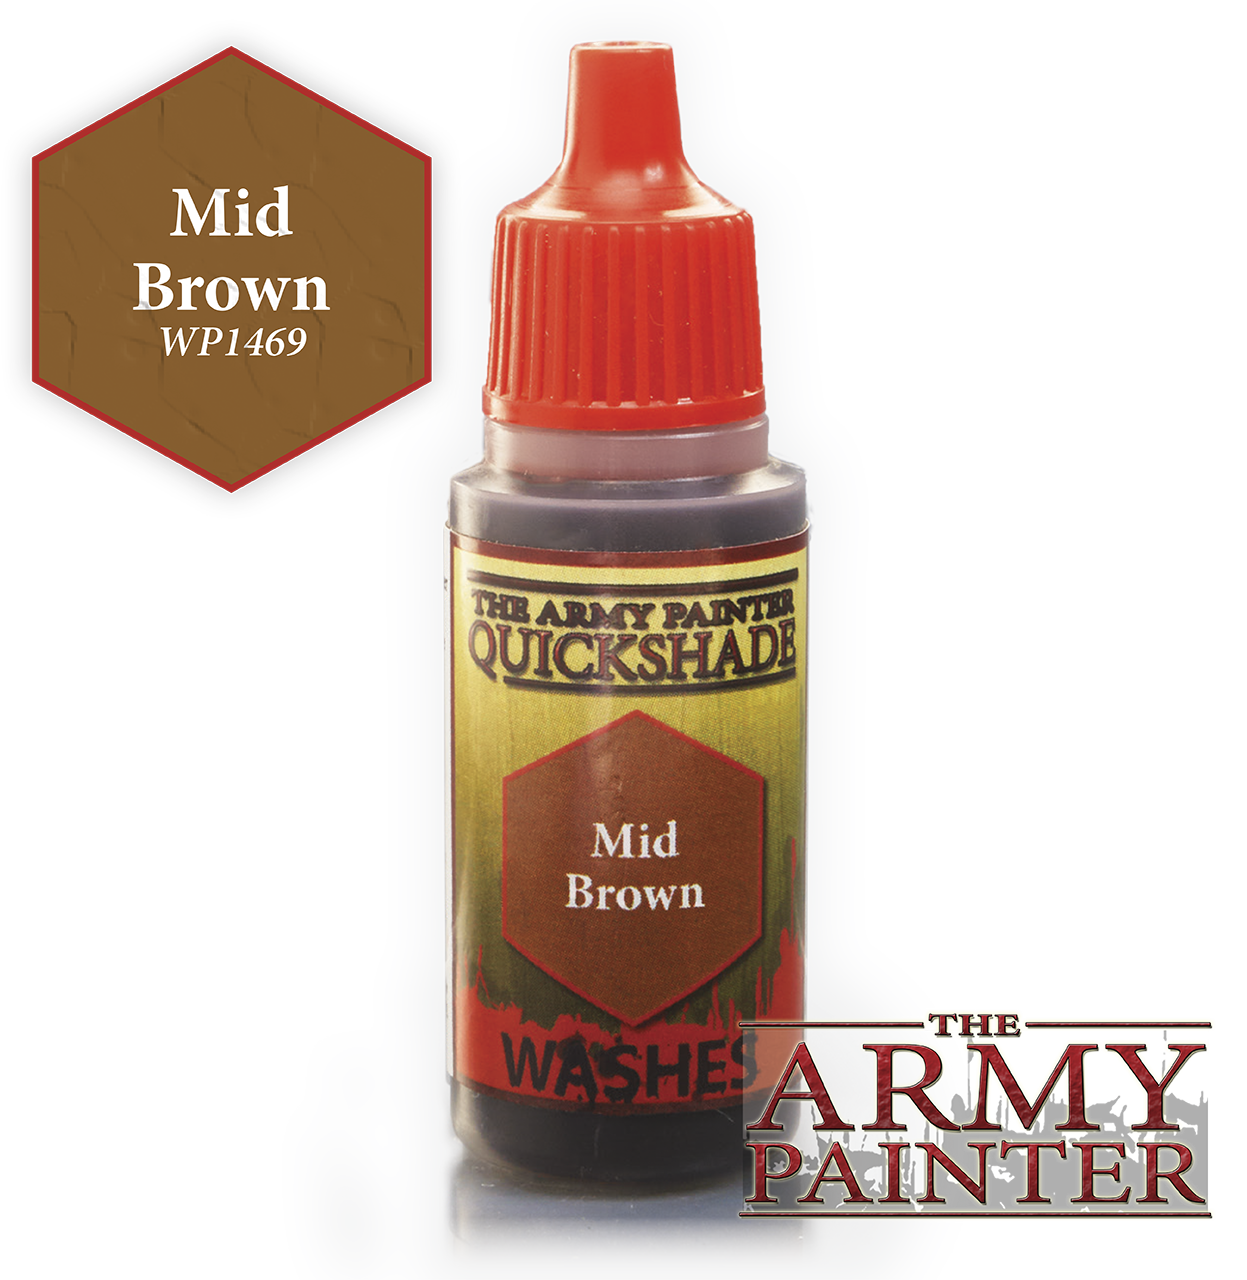 The ARMY PAINTER: Washes Warpaints - Mid Brown | Tacoma Games